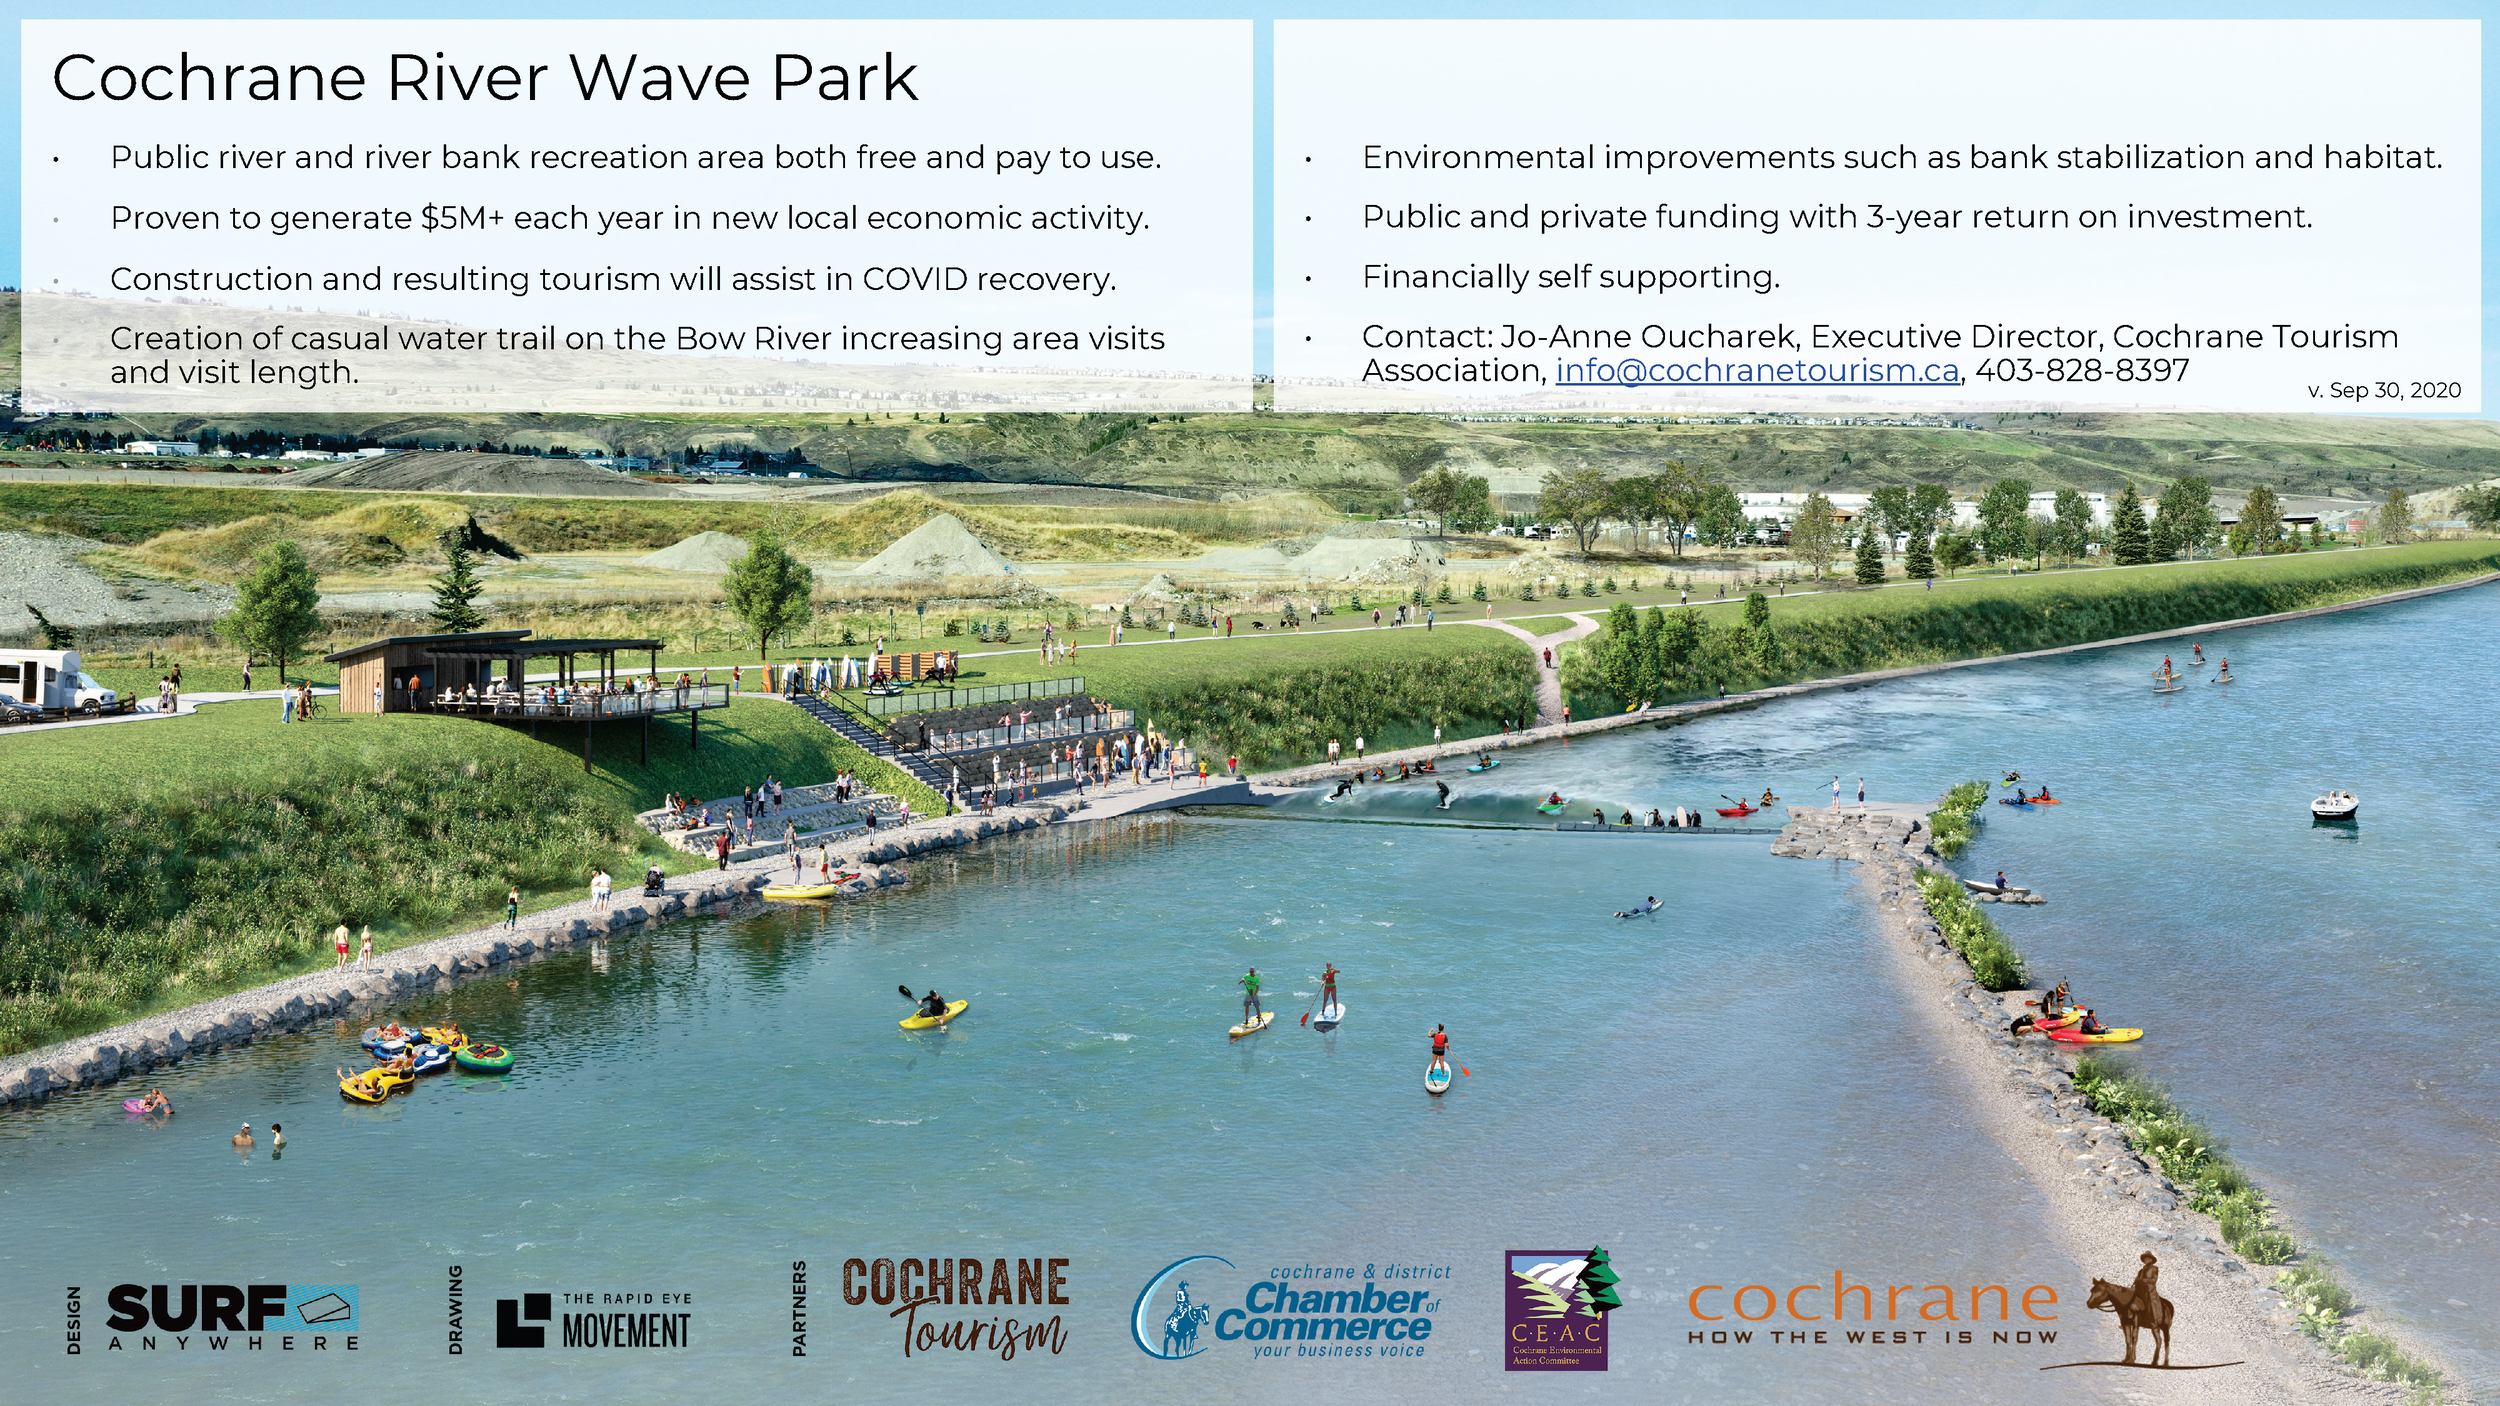 Alberta river wave parks overview 2020 11 04_Page_3.png